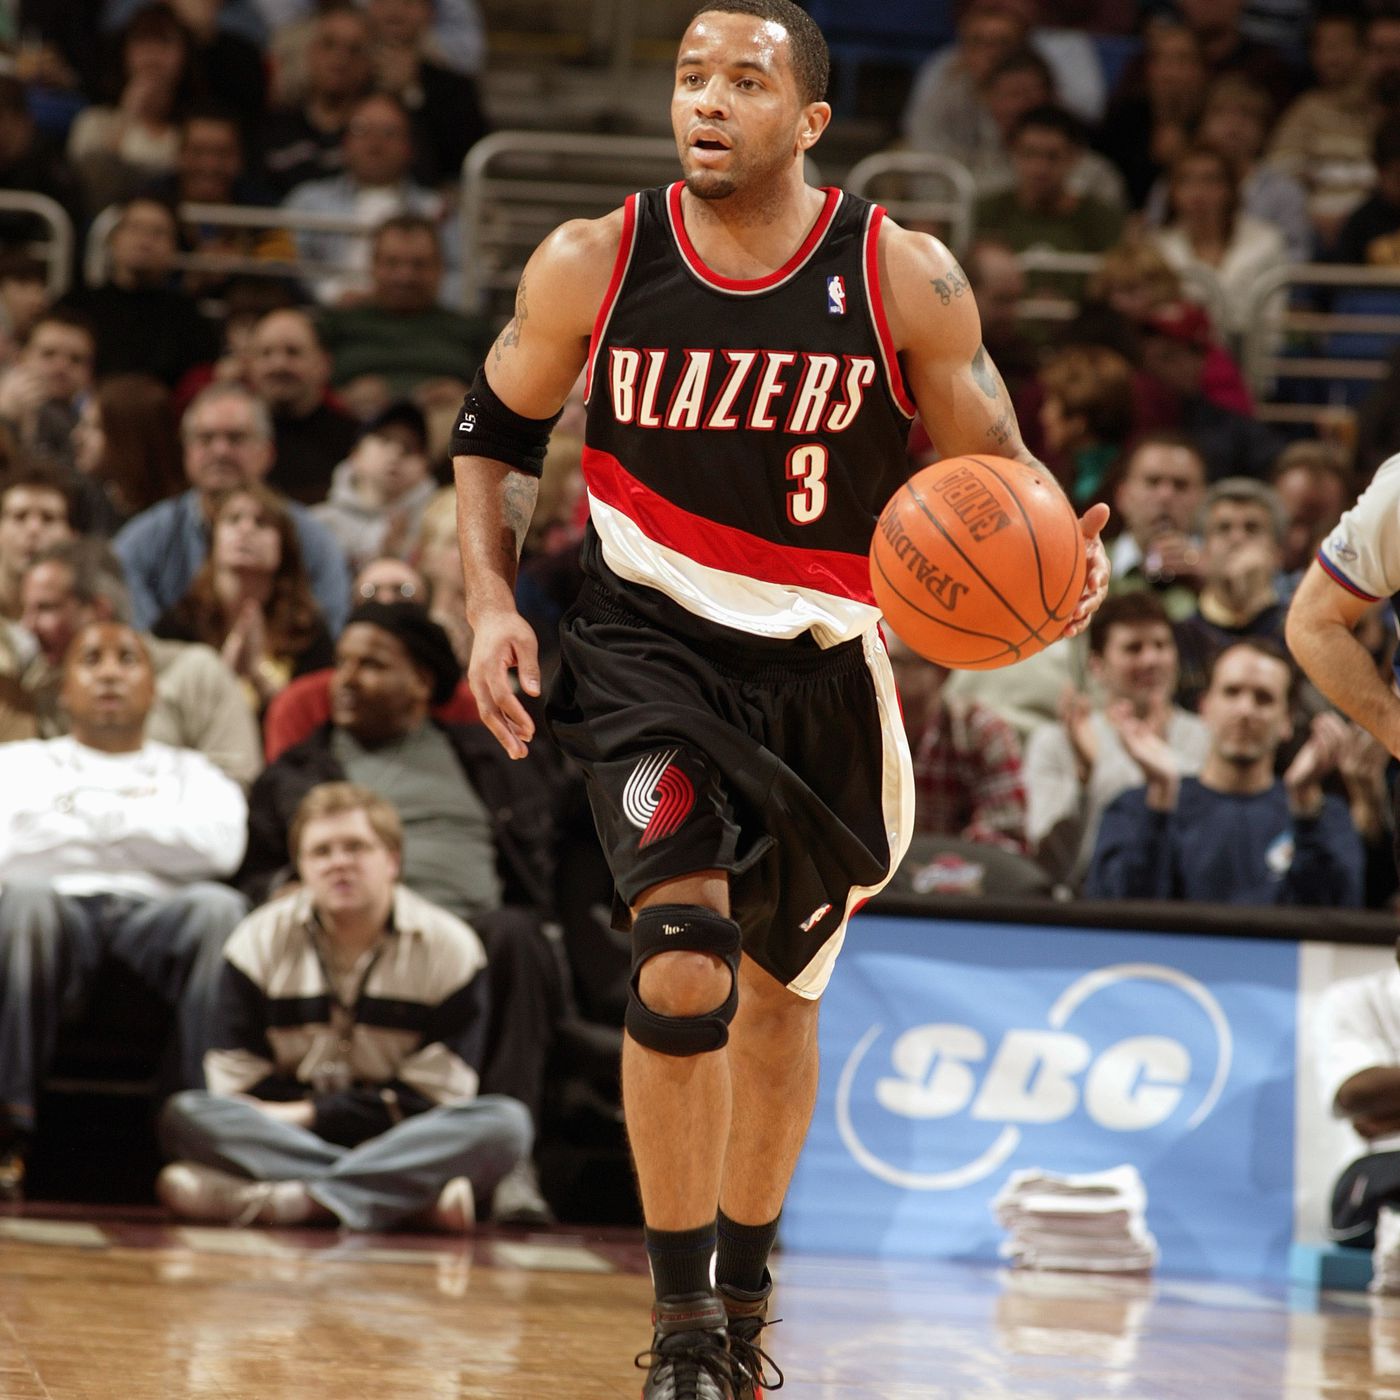 damon stoudamire rookie of the year